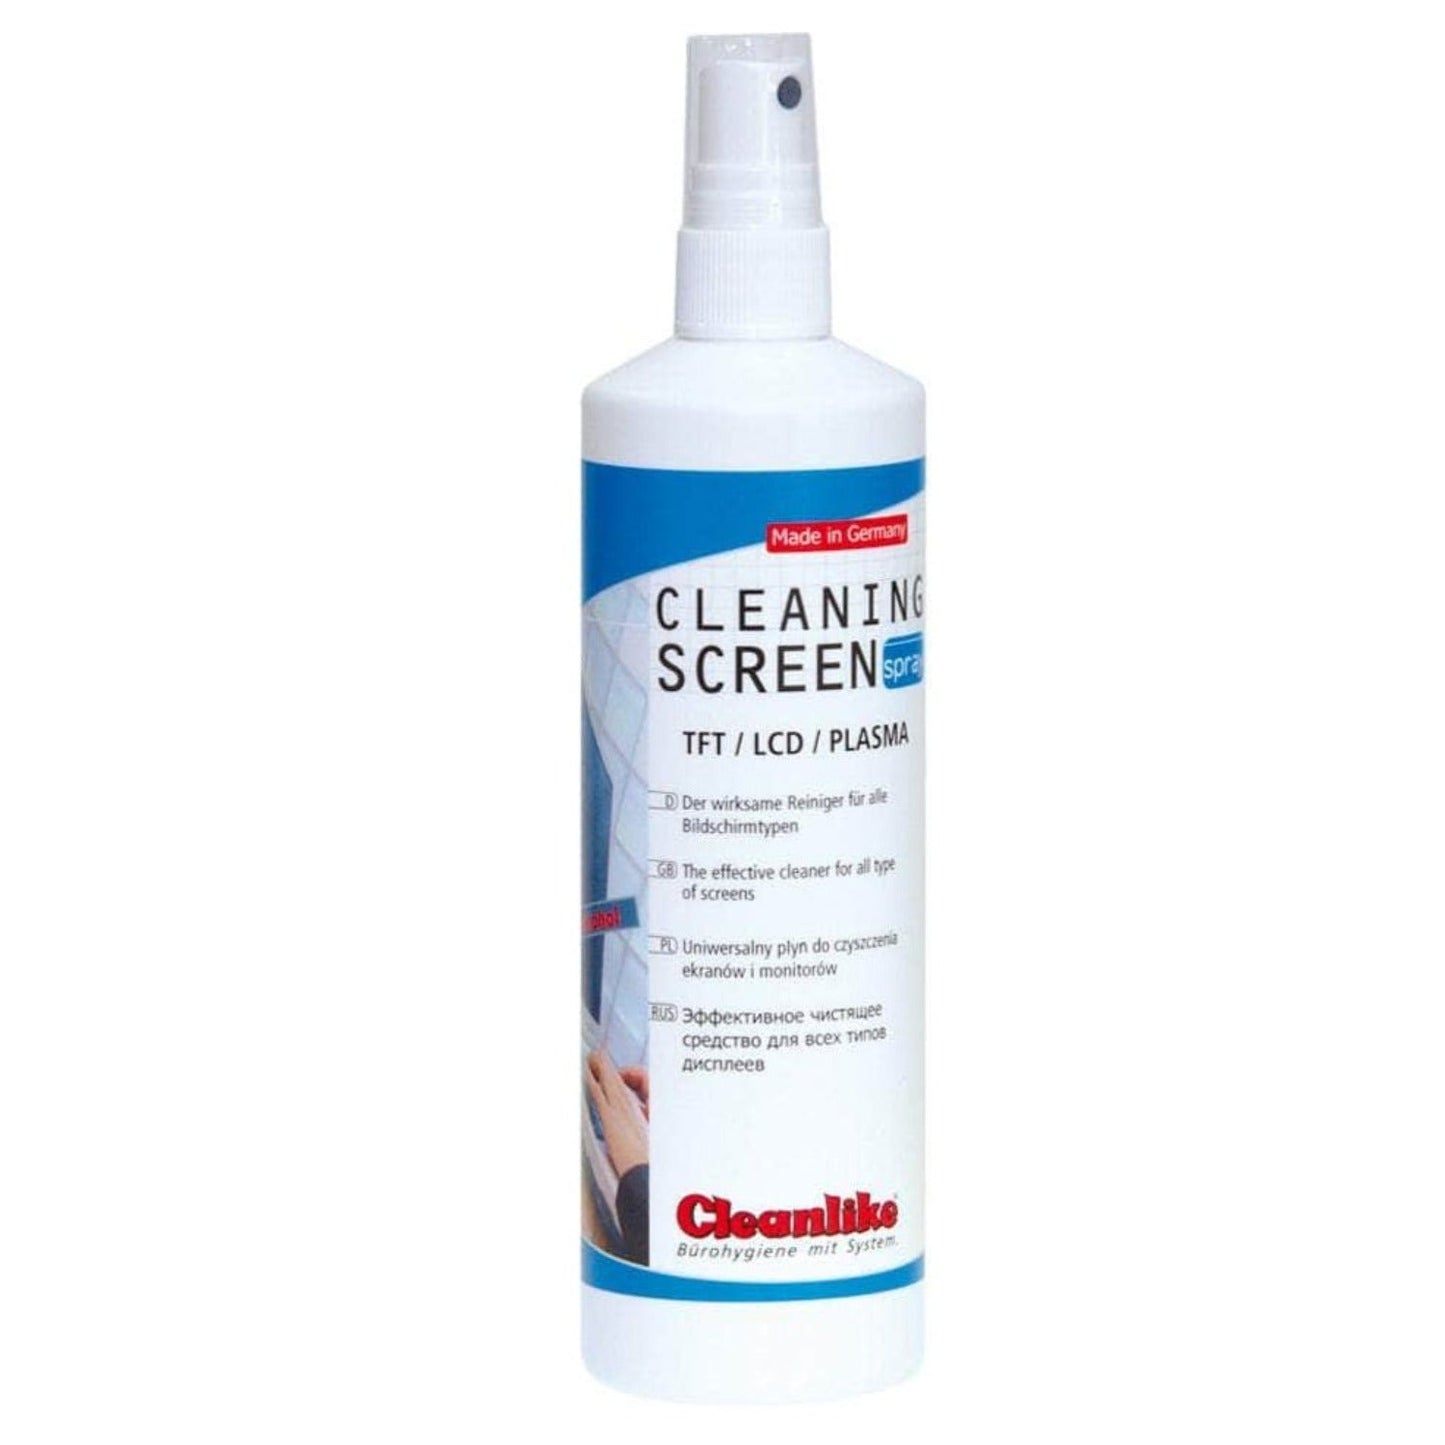 Cleanlike Cleaning Screen screen cleaner without alcohol - 250 ml